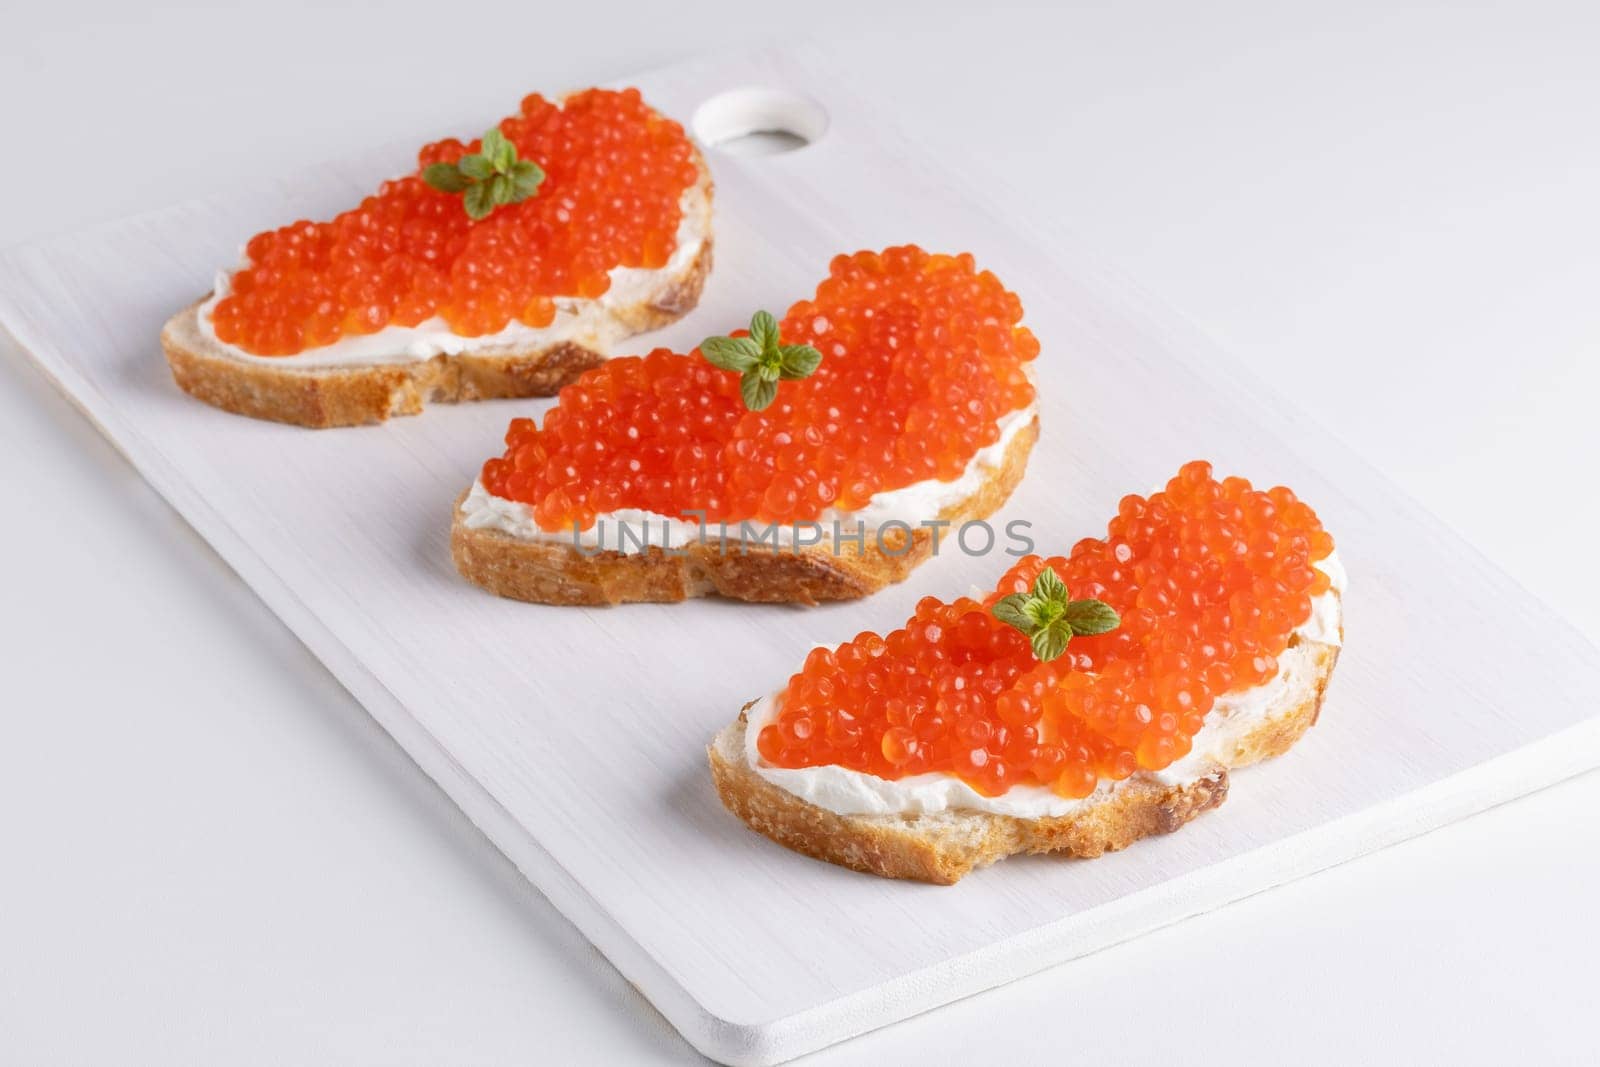 Three sandwiches with red caviar on a cutting board. A delicious appetizer of trout caviar on a slice of bread with cream cheese. Salted salmon caviar for fish delicacy concept.